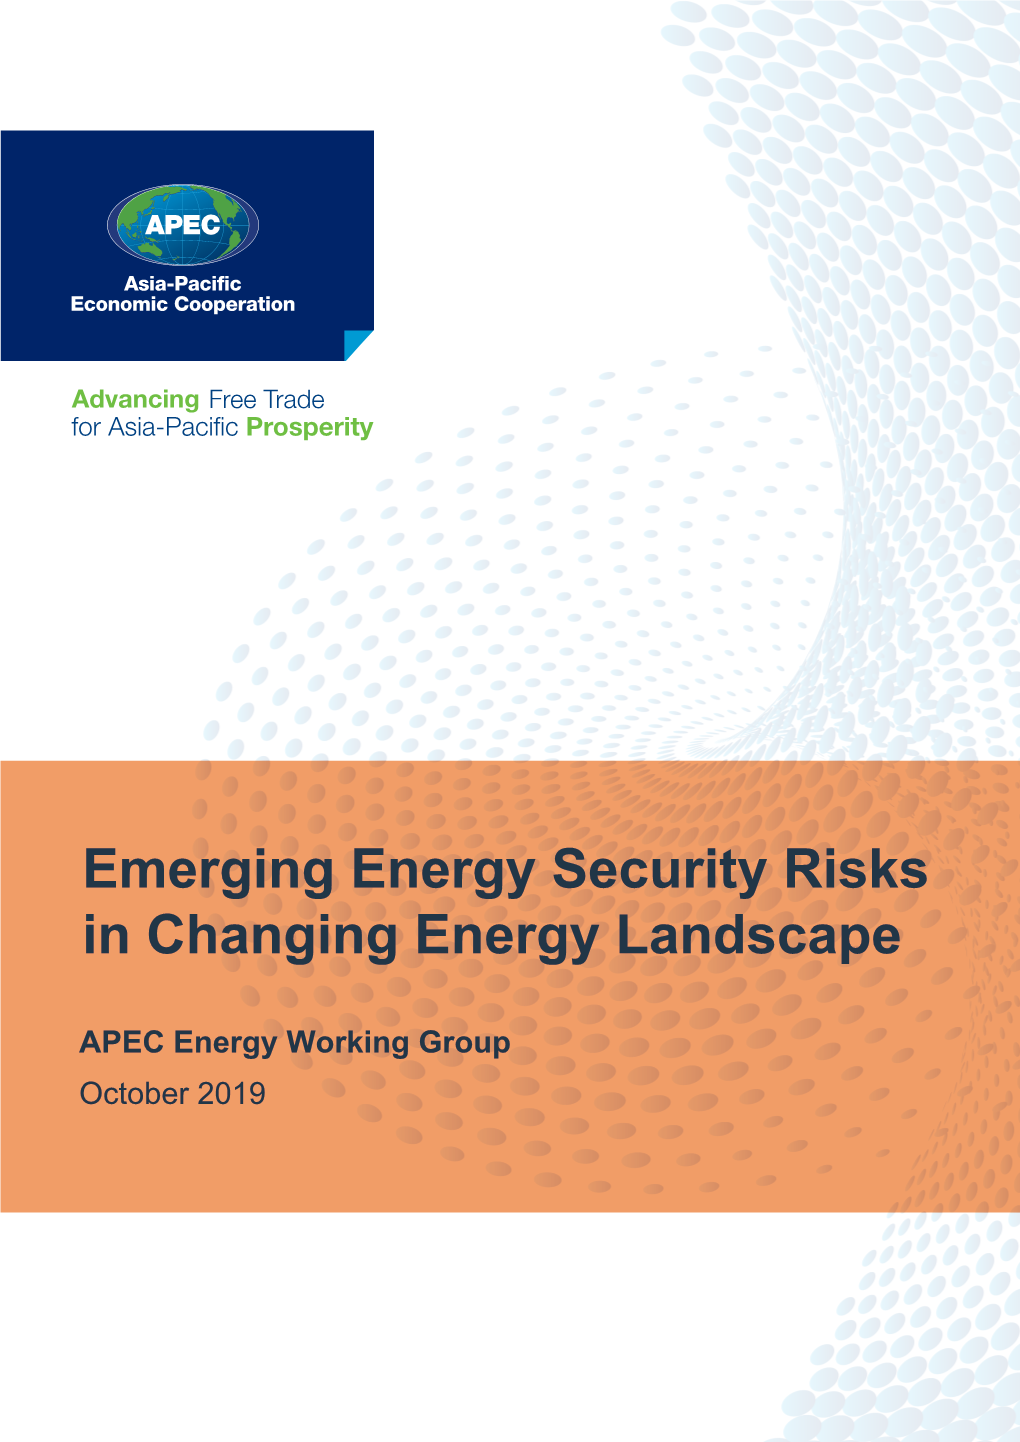 Emerging Energy Security Risks in Changing Energy Landscape